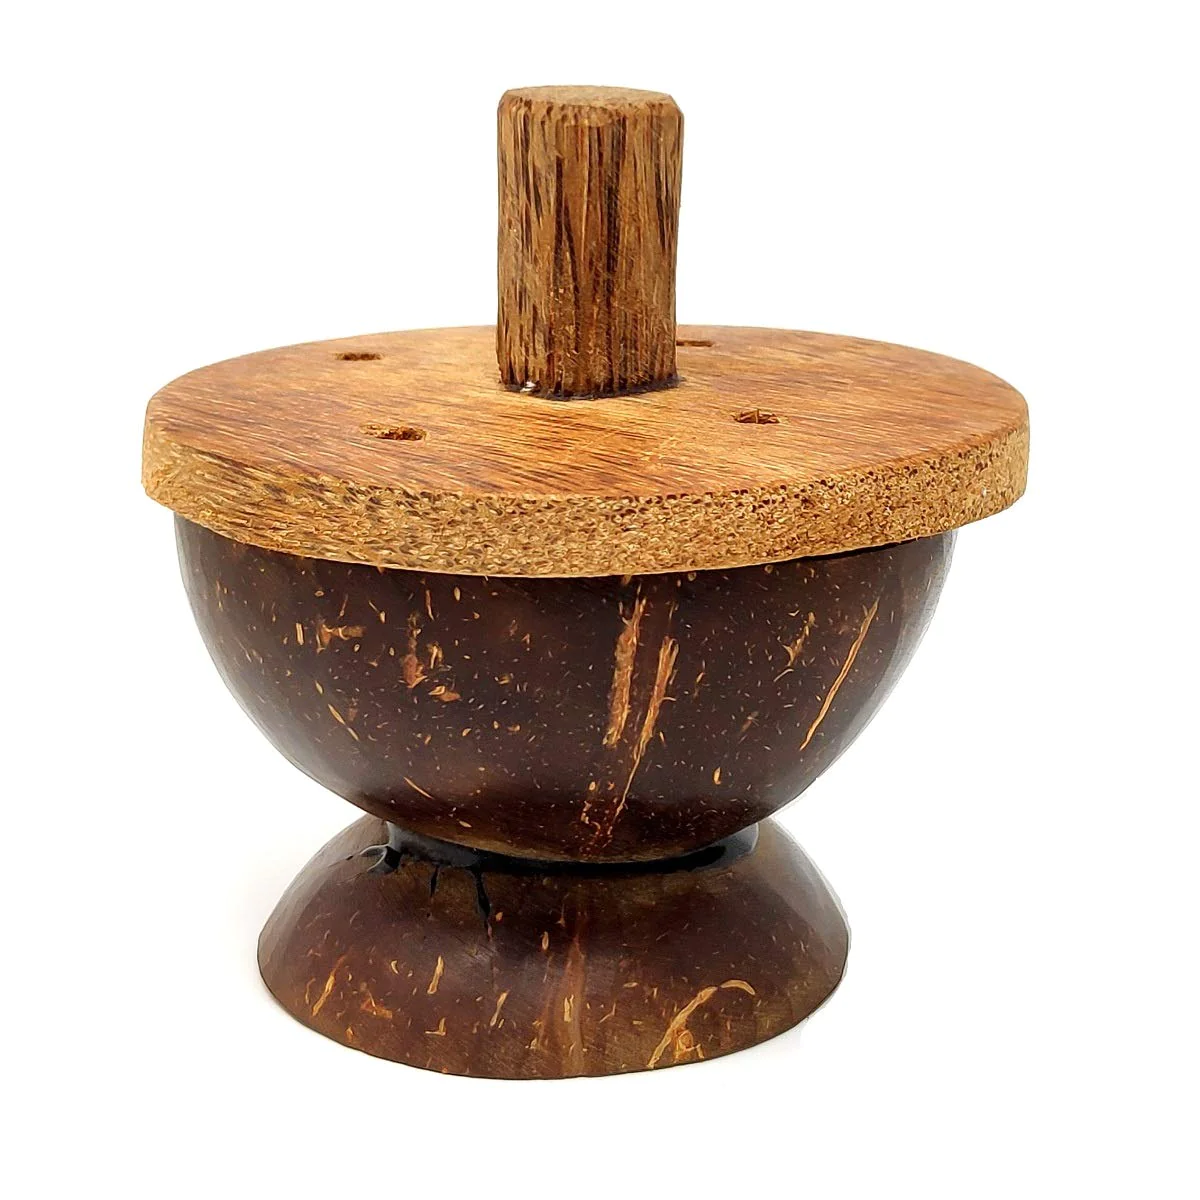 Ecocraft India Coconut Shell Puttu Maker/Chiratta Puttu Steamer – Made from Coconut Shells and Wood